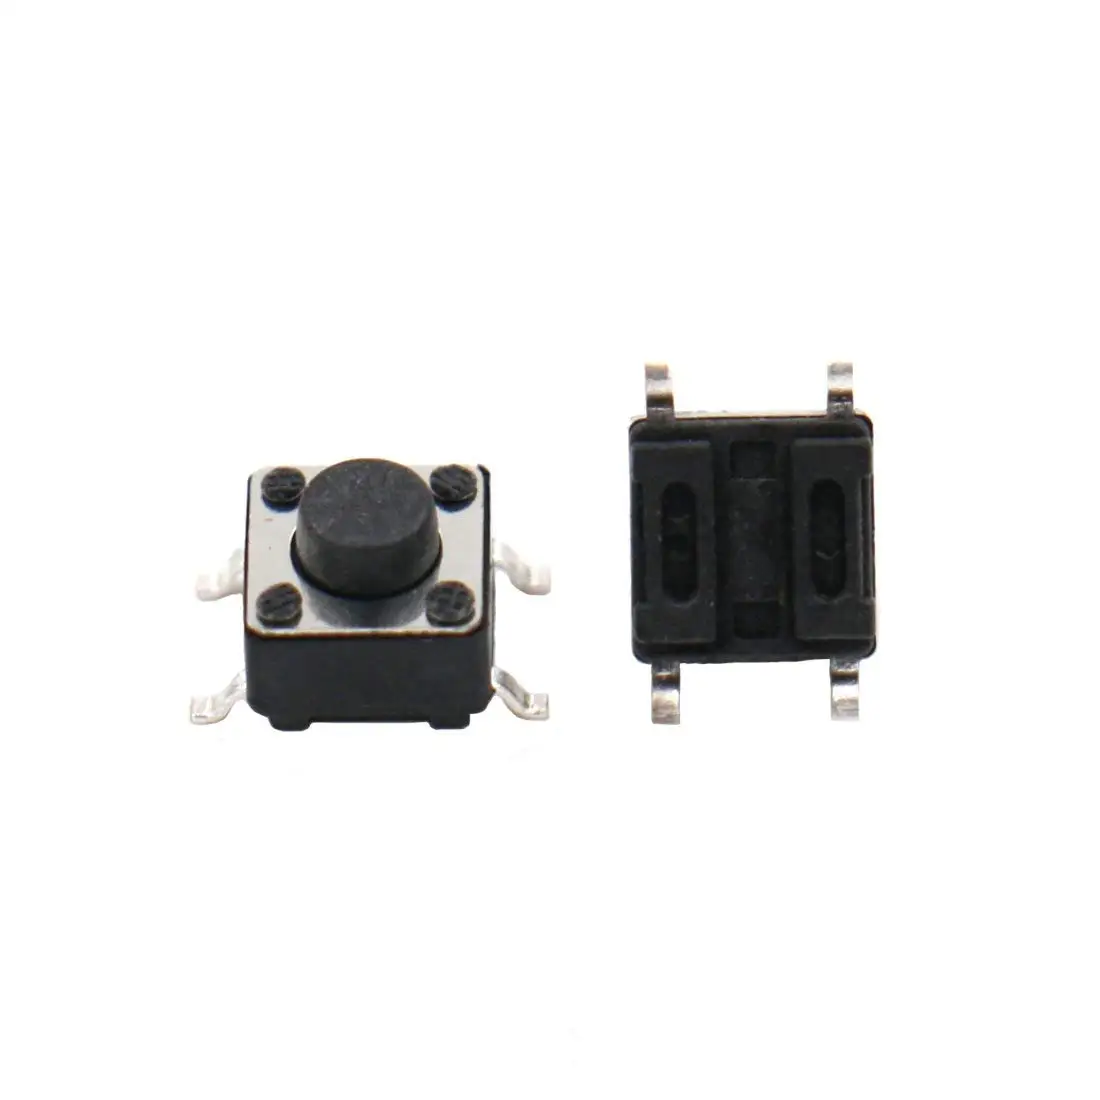 Momentary Tact Tactile Push Button Switch SMD SMT PCB 4 Pin 6 x 6 x 9 mm 100 PCS